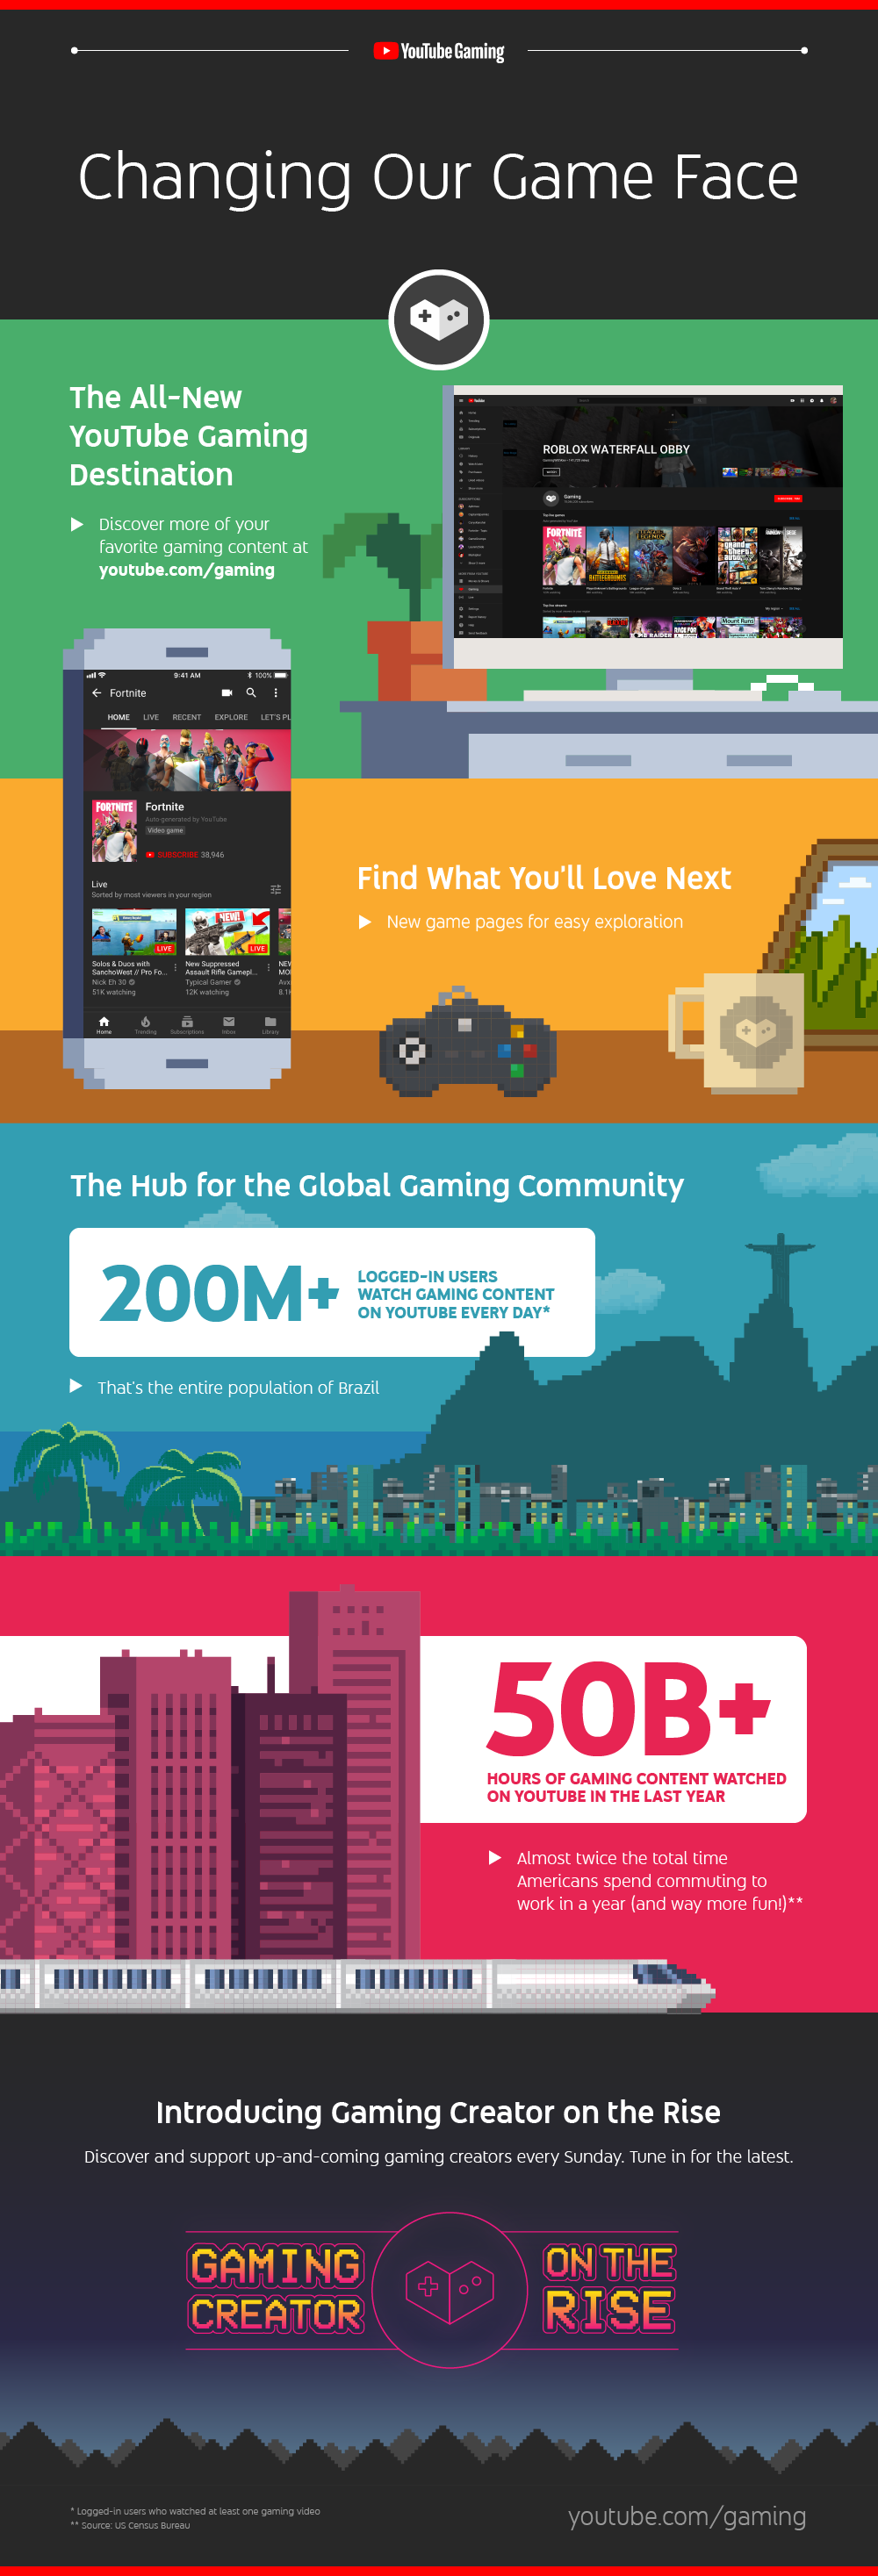 Gaming gets a new home on YouTube - infographic